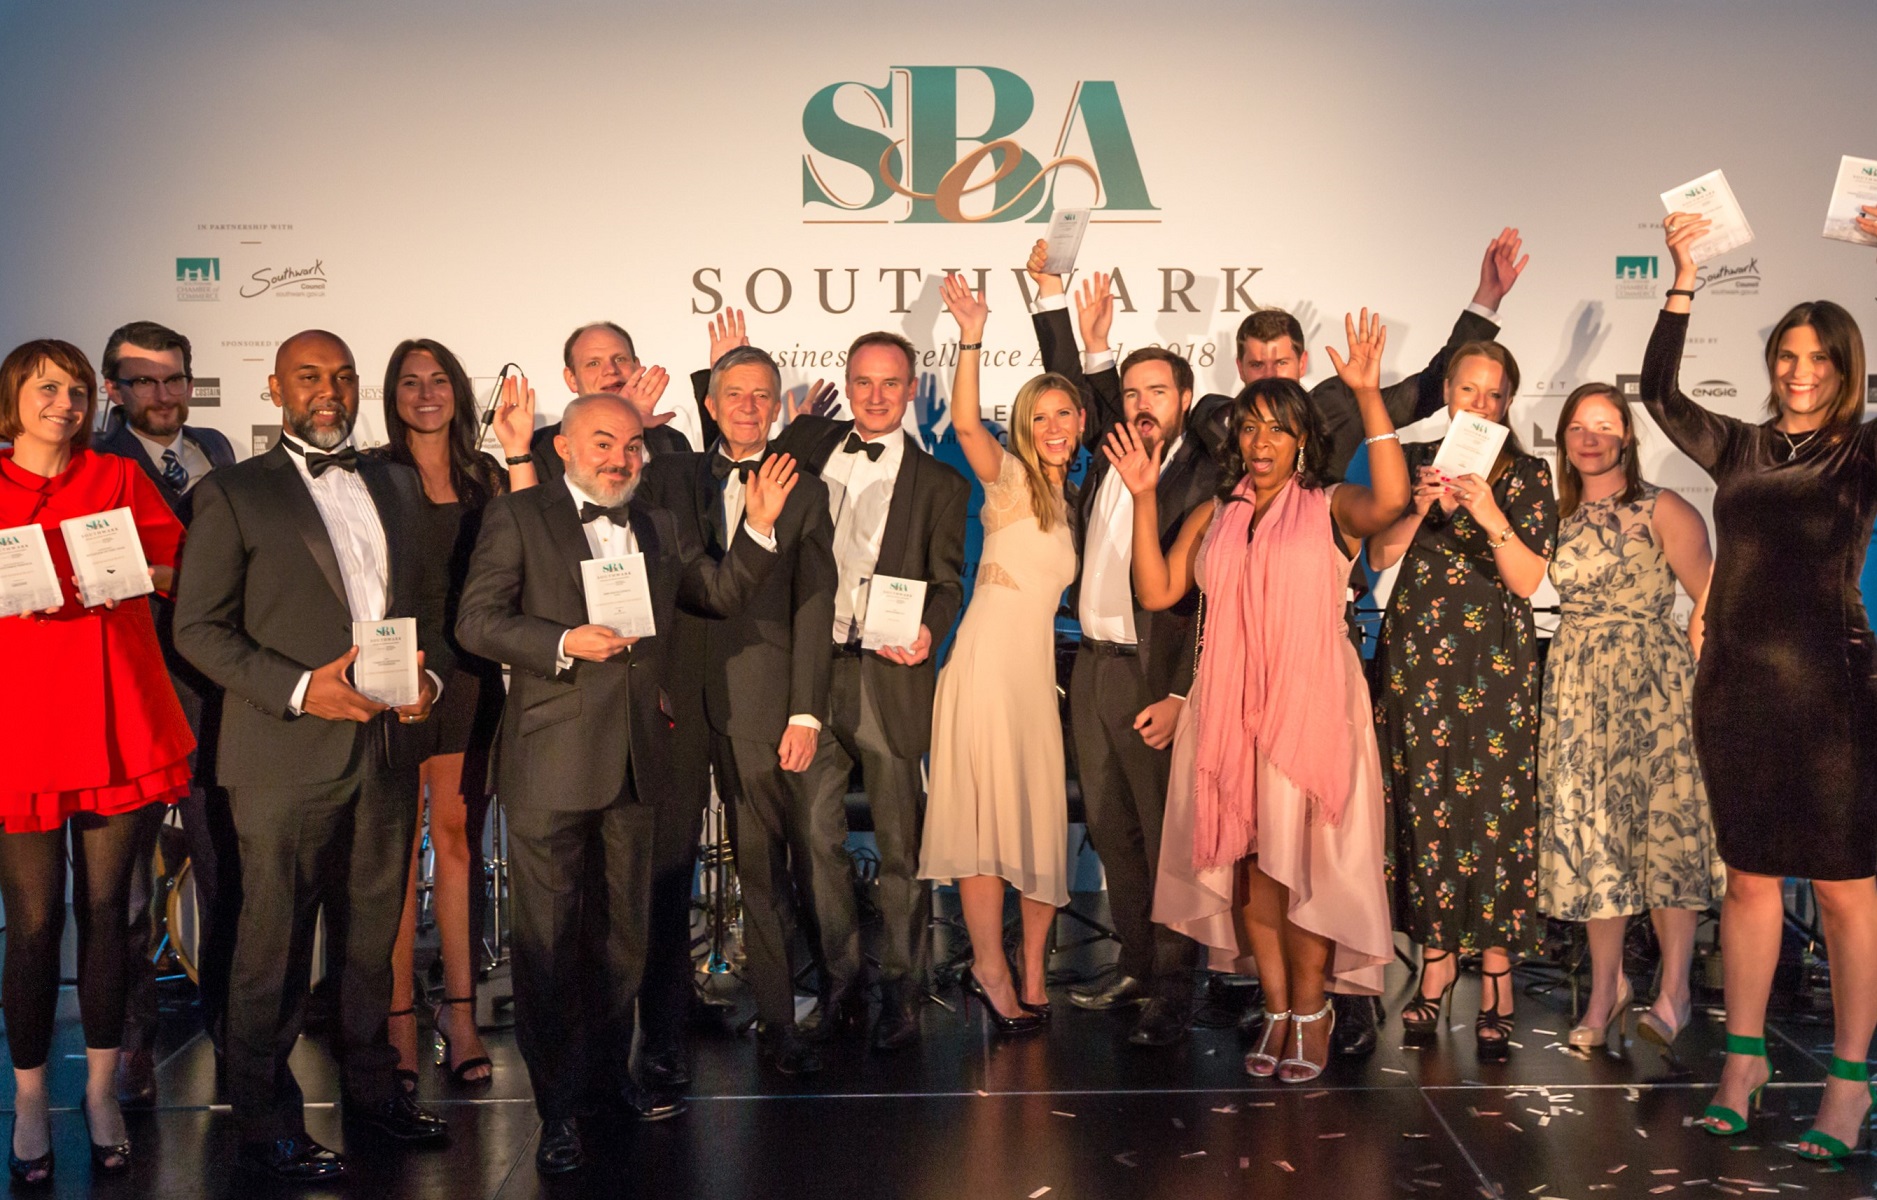 Southwark’s leading business awards have attracted an exceptional range of entries from inspirational firms